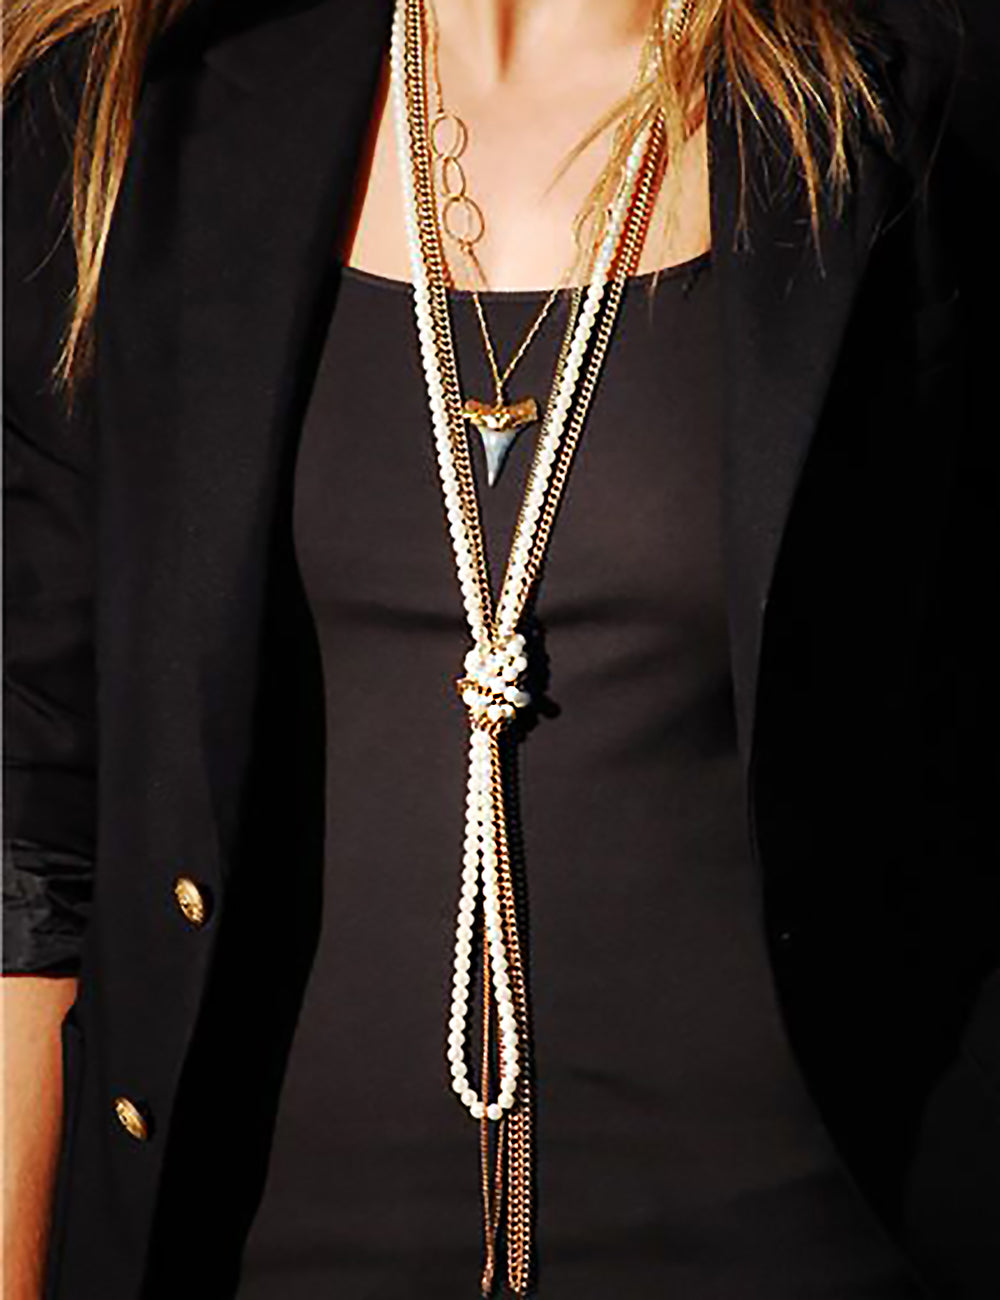 How to Wear a Pearl Rope: Knotted Pearl Rope Necklaces